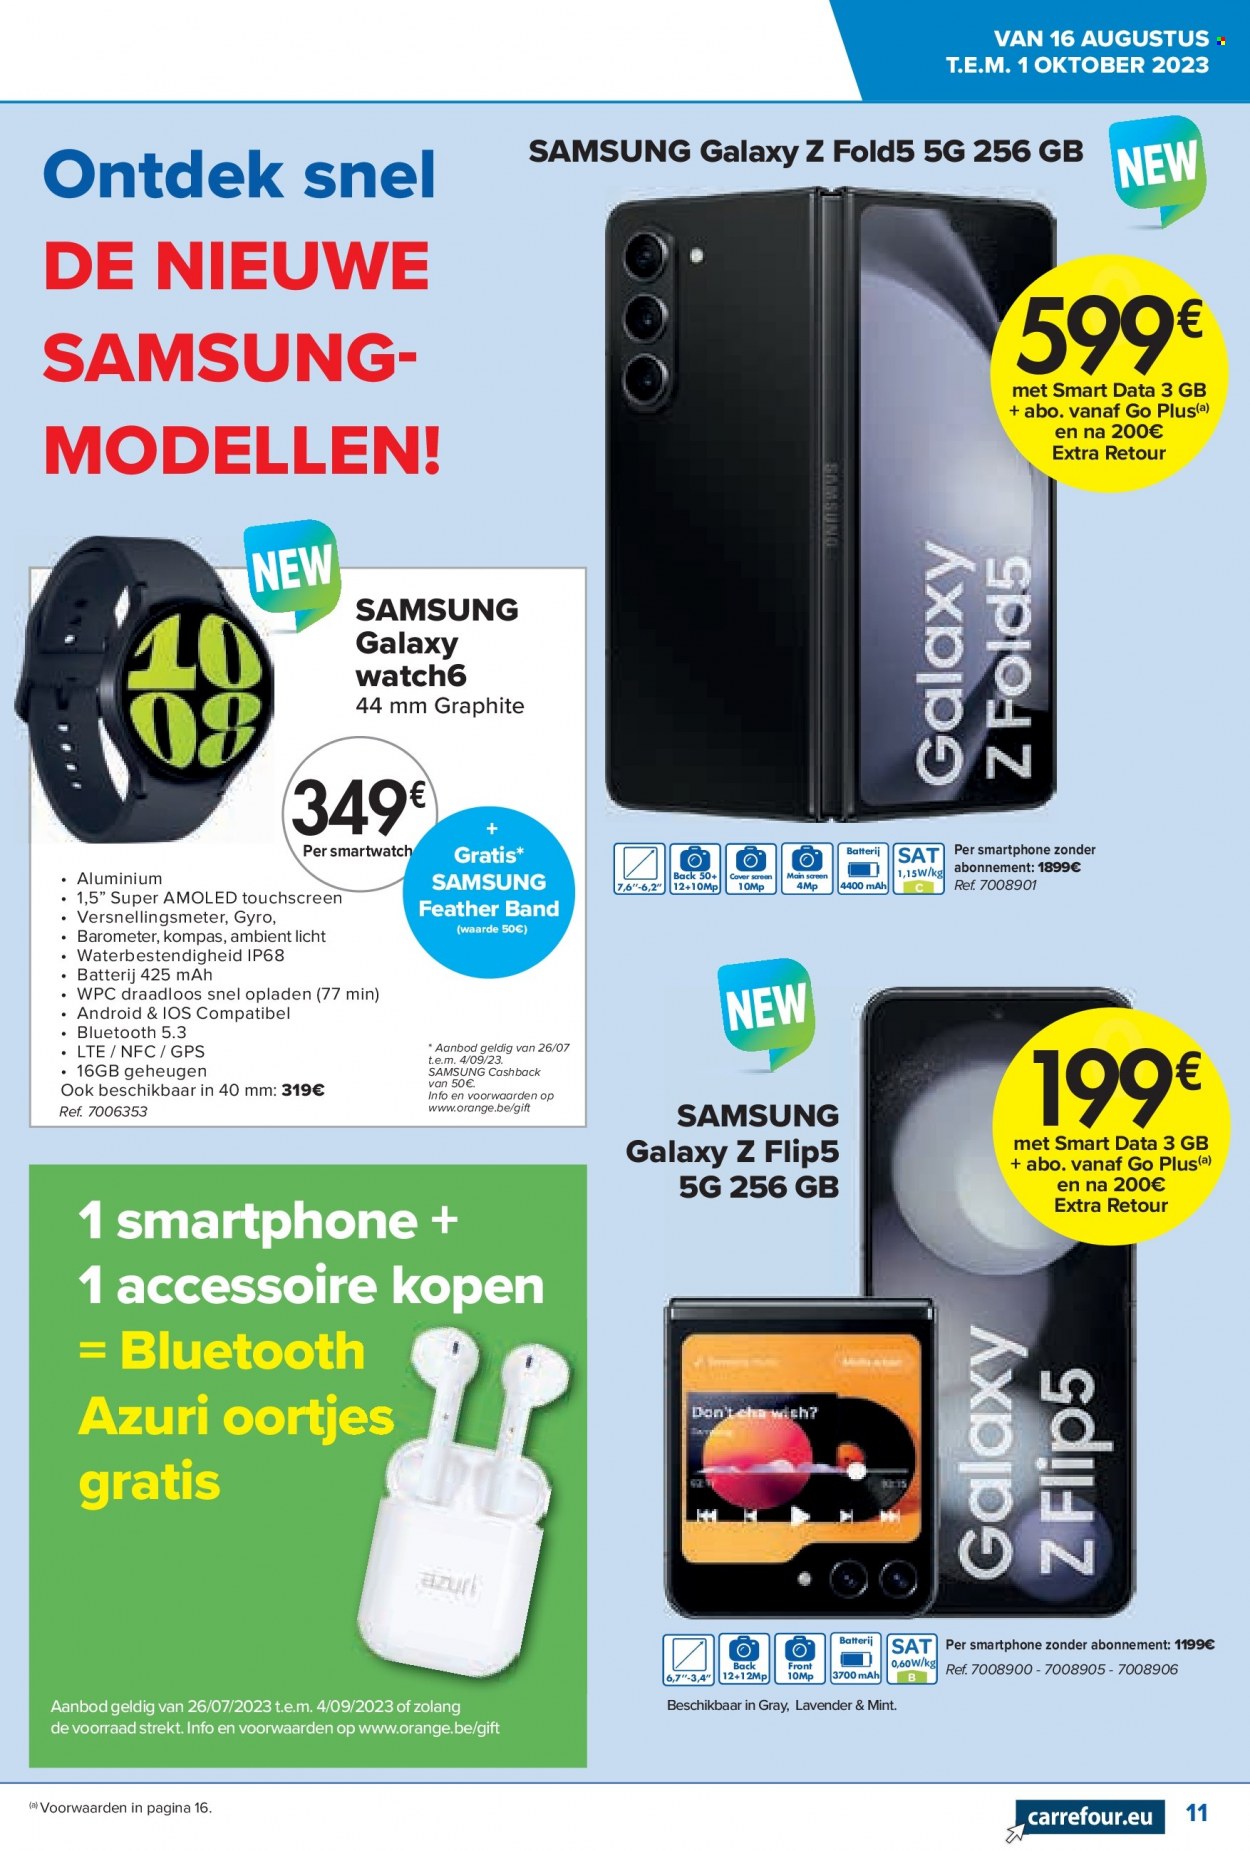 Catalogue Carrefour hypermarkt - 16.8.2023 - 1.10.2023. Page 11.